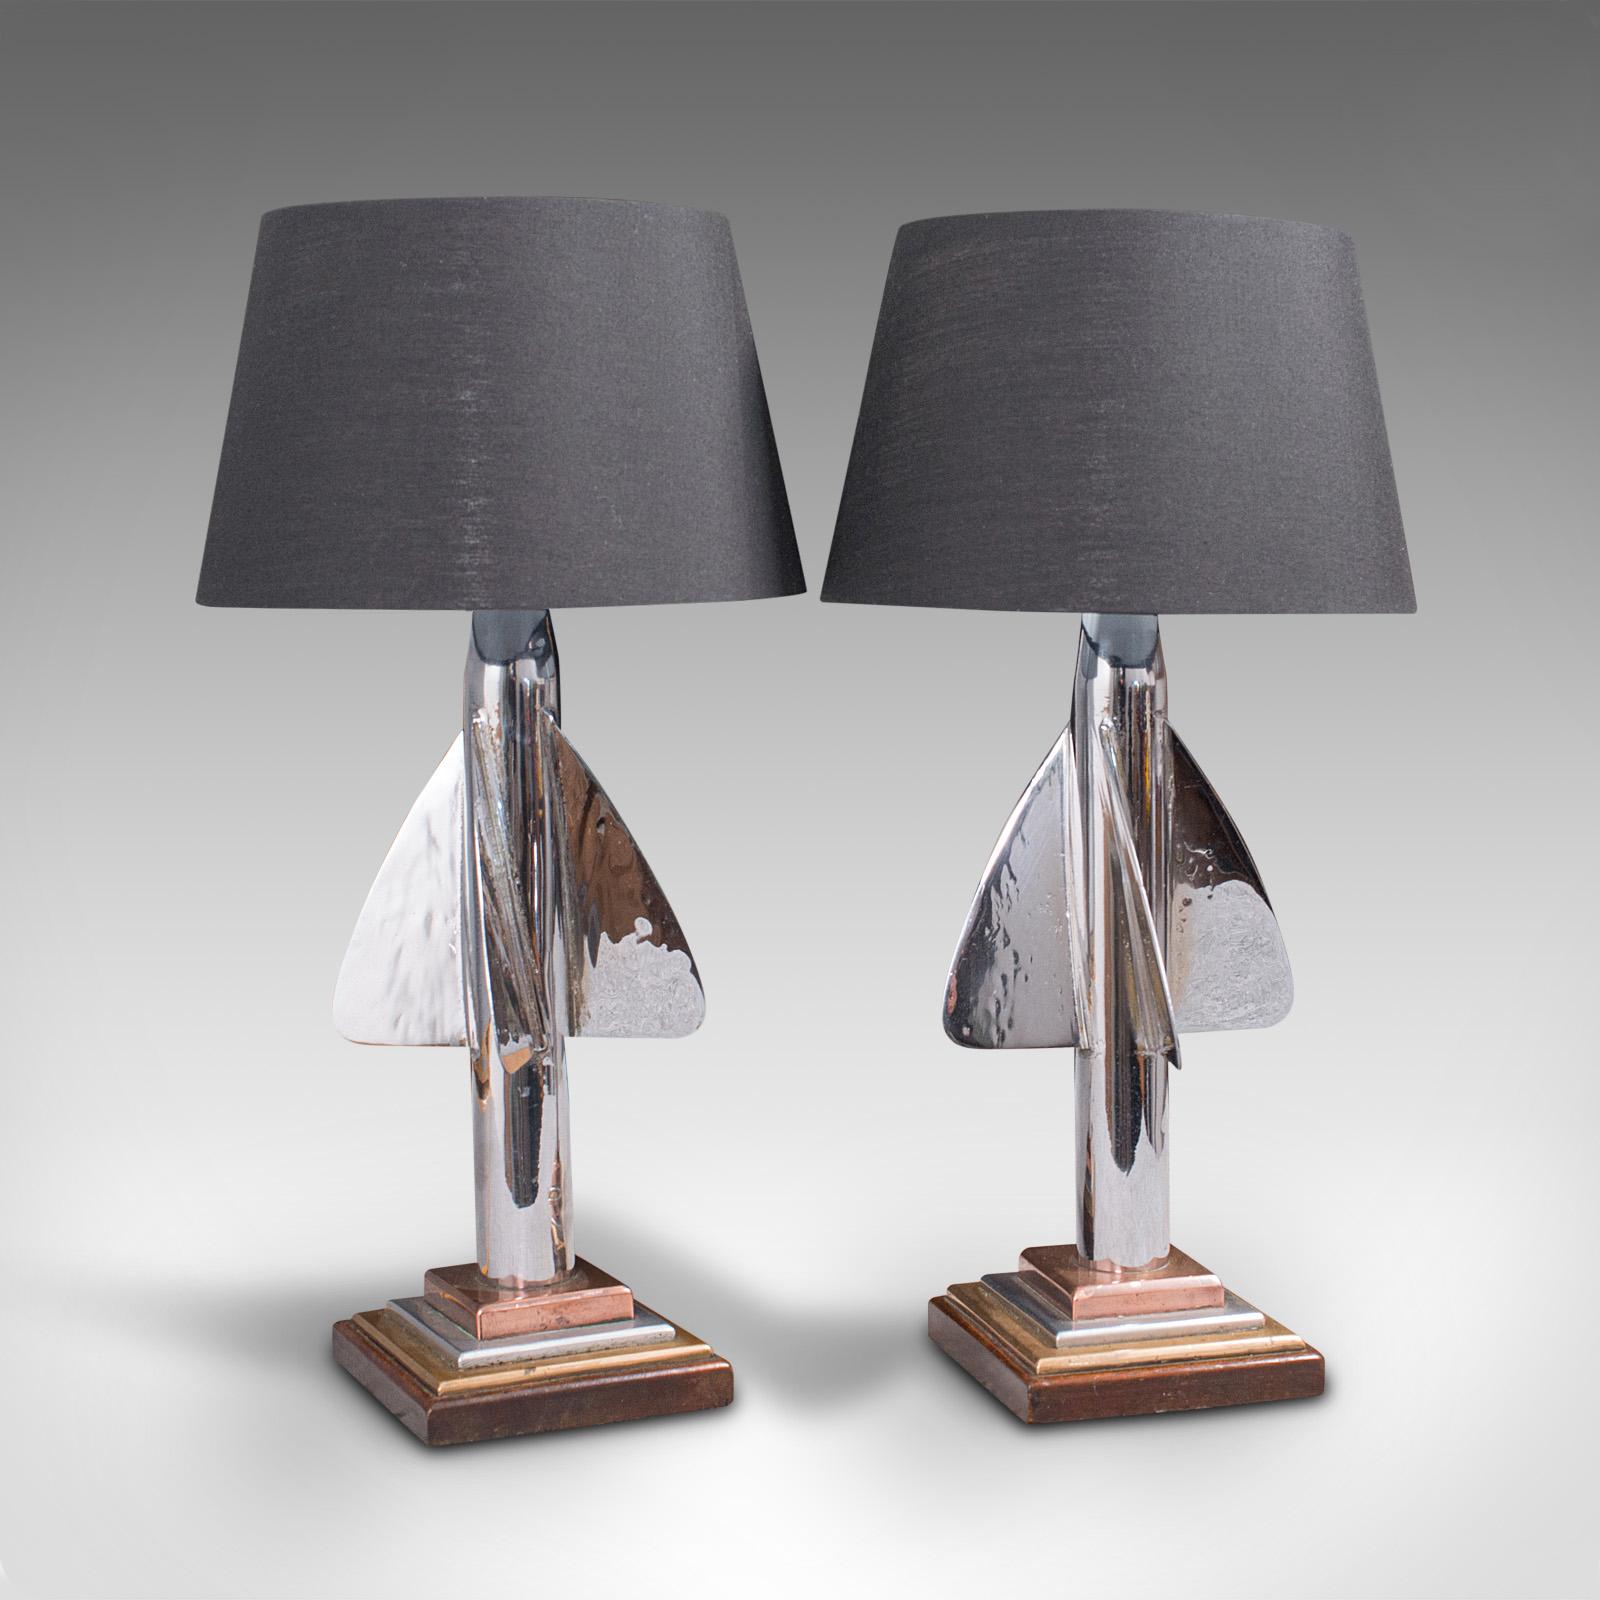 This is a pair of vintage maritime desk lamps. An English, chromed ship's log trailing fin table light, dating to the early 20th century and later, circa 1930.

Fascinating nautical forms with eye-catching finish
Displays a desirable aged patina